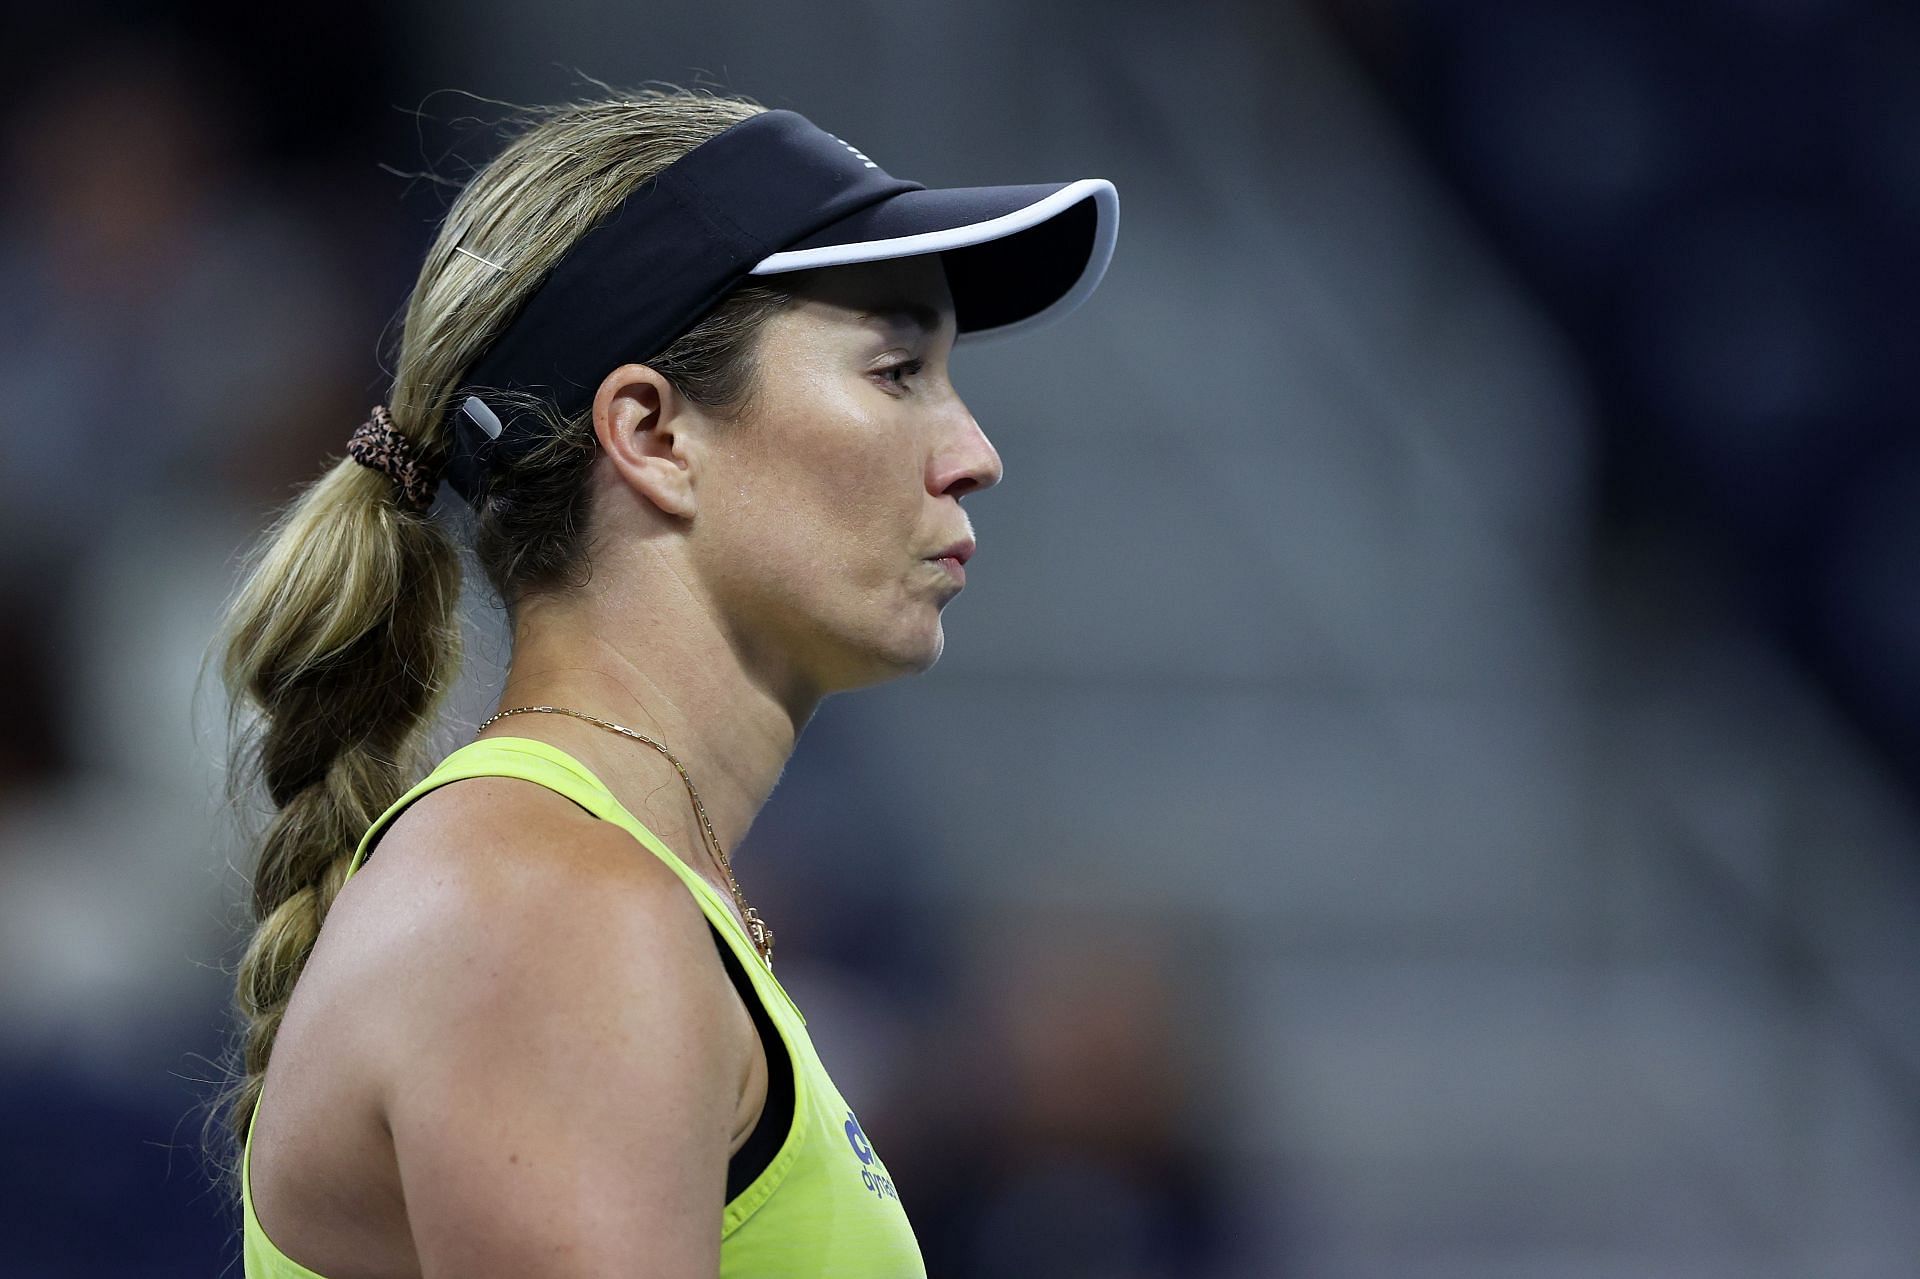 Danielle Collins is through to the 2022 Australian Open semifinal